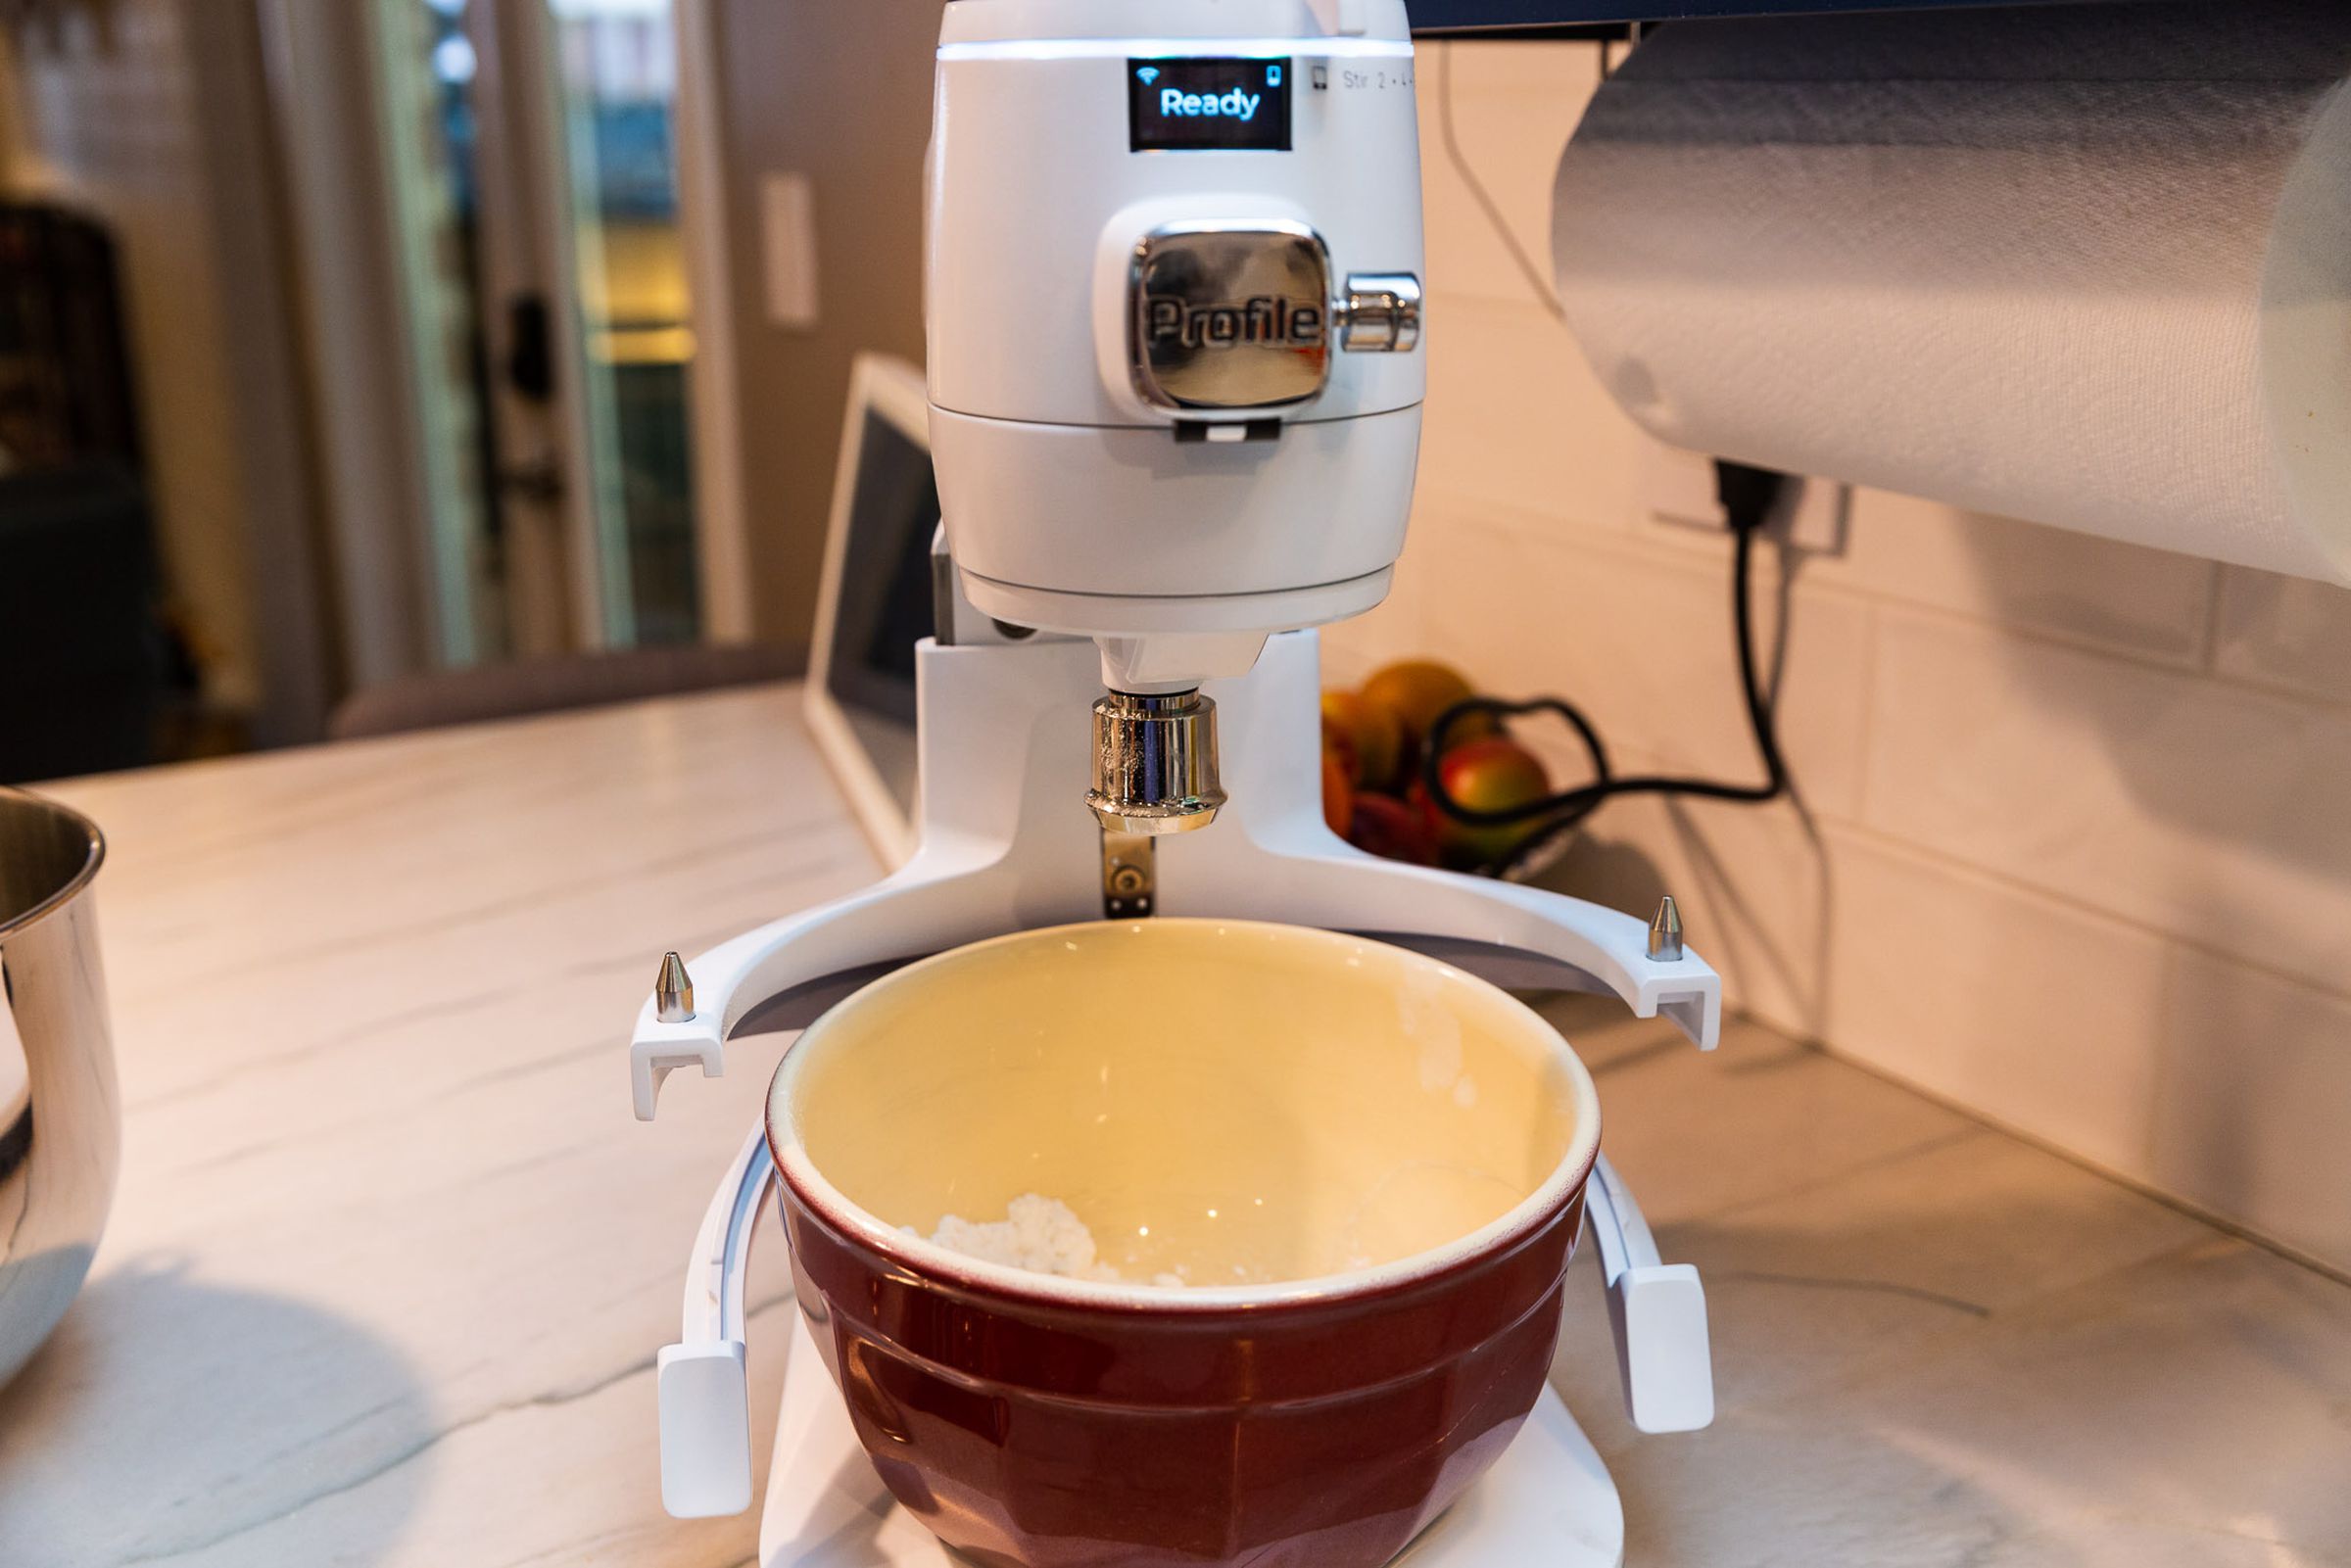 The mixer's base is a scale, so you can use any bowl to measure ingredients.